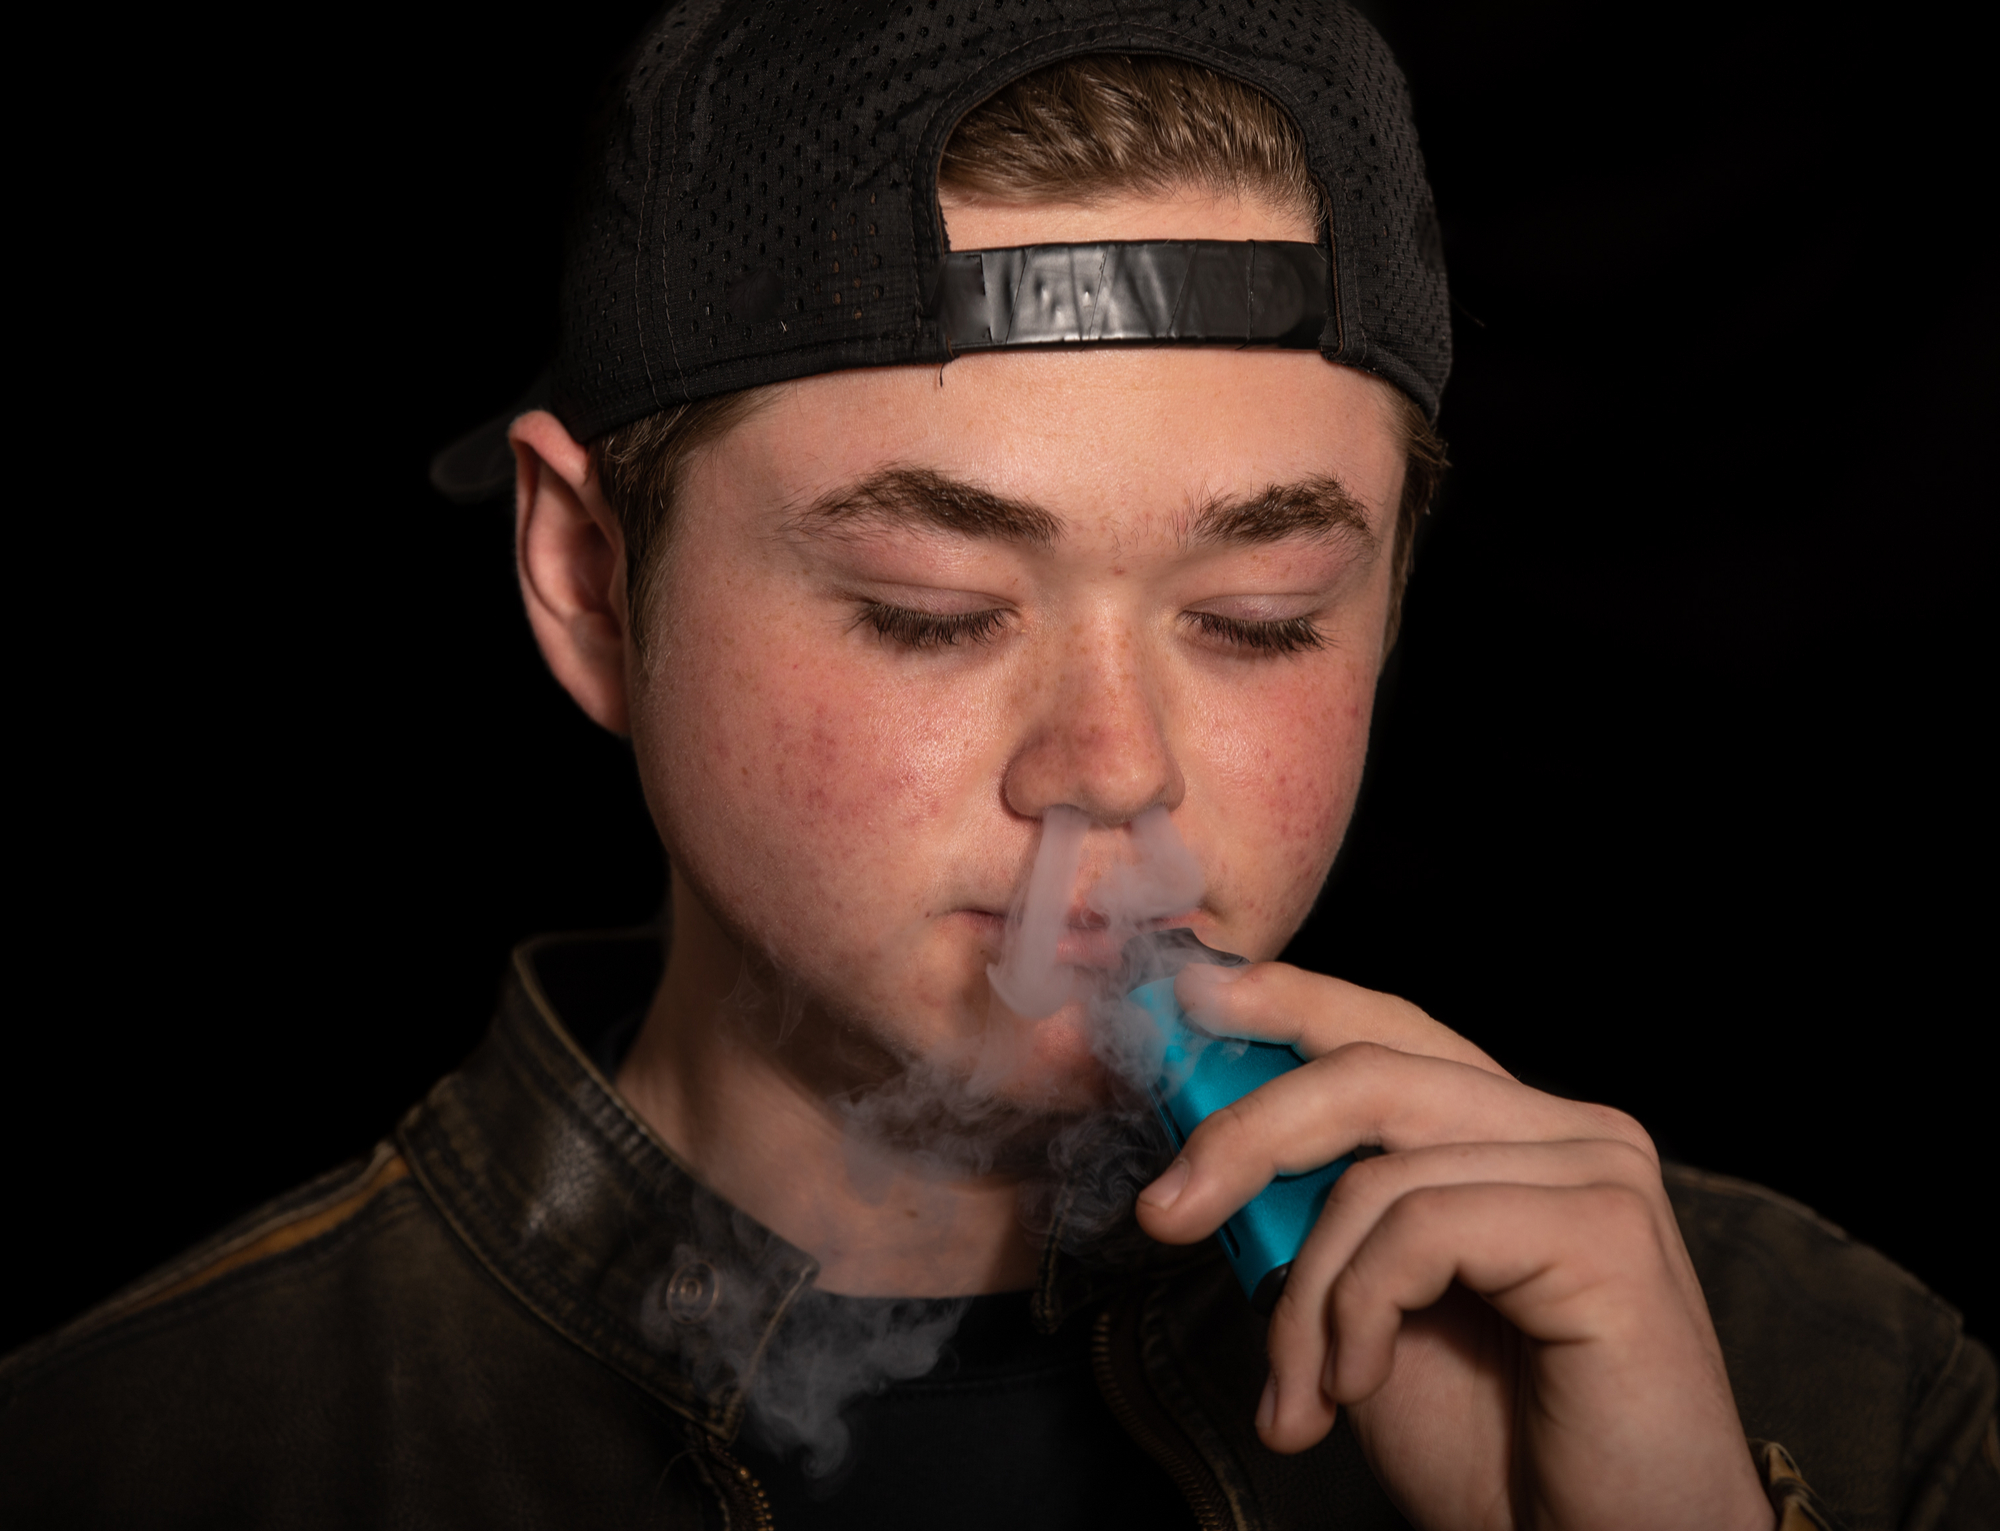 FDA to Teens: Why Must You Vape So Much?